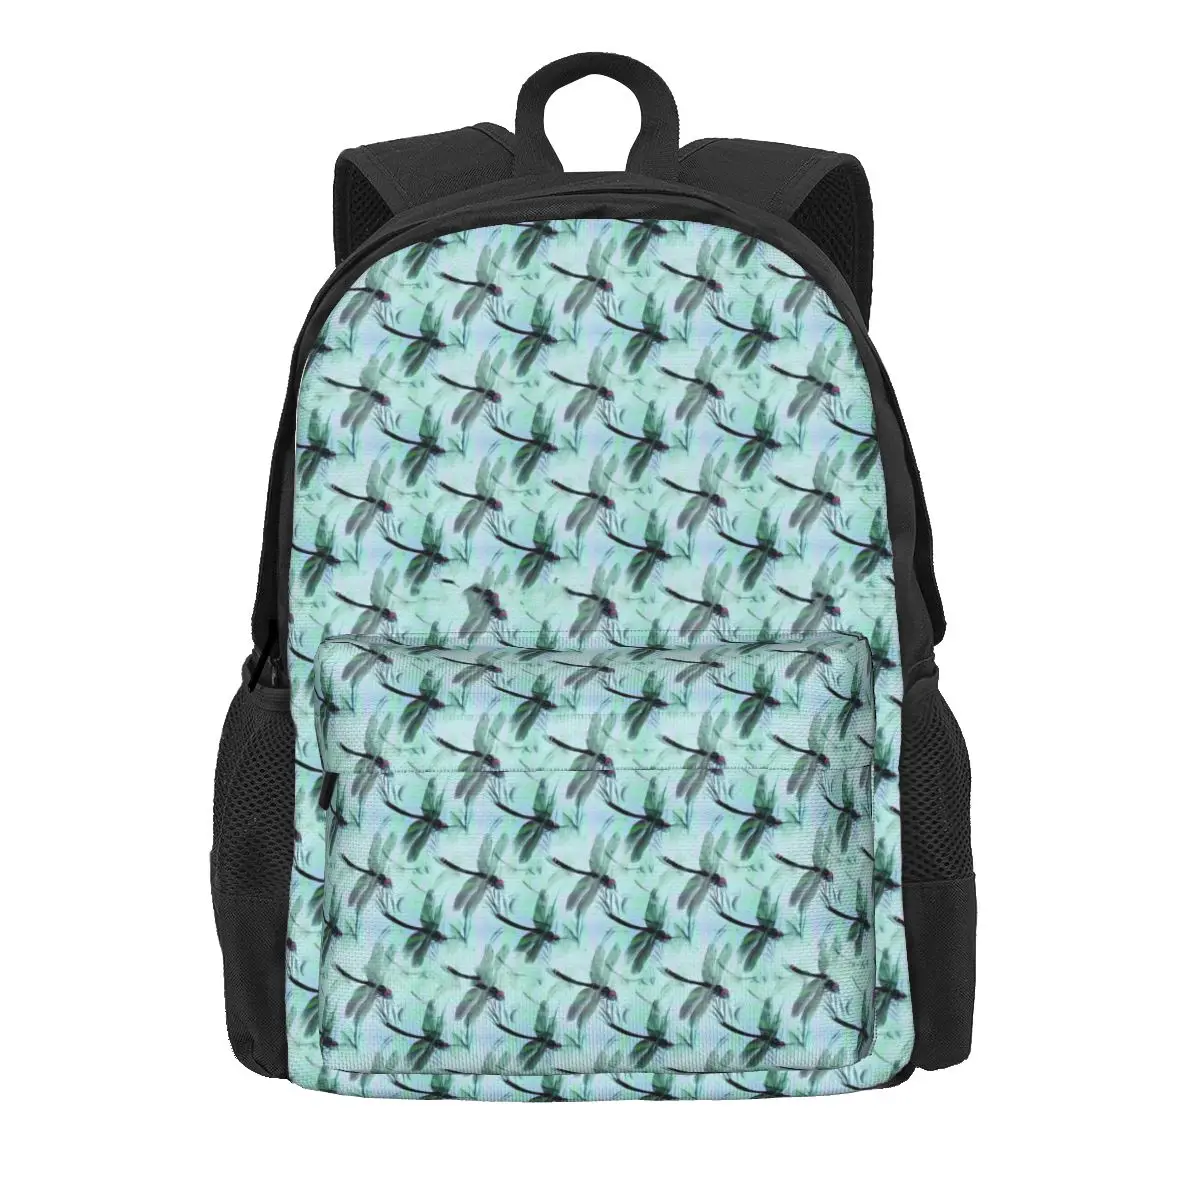 

Dragonfly Print Backpack Student Unisex Cute Animal Soft Backpacks Aesthetic High School Bags Sport High Quality Rucksack